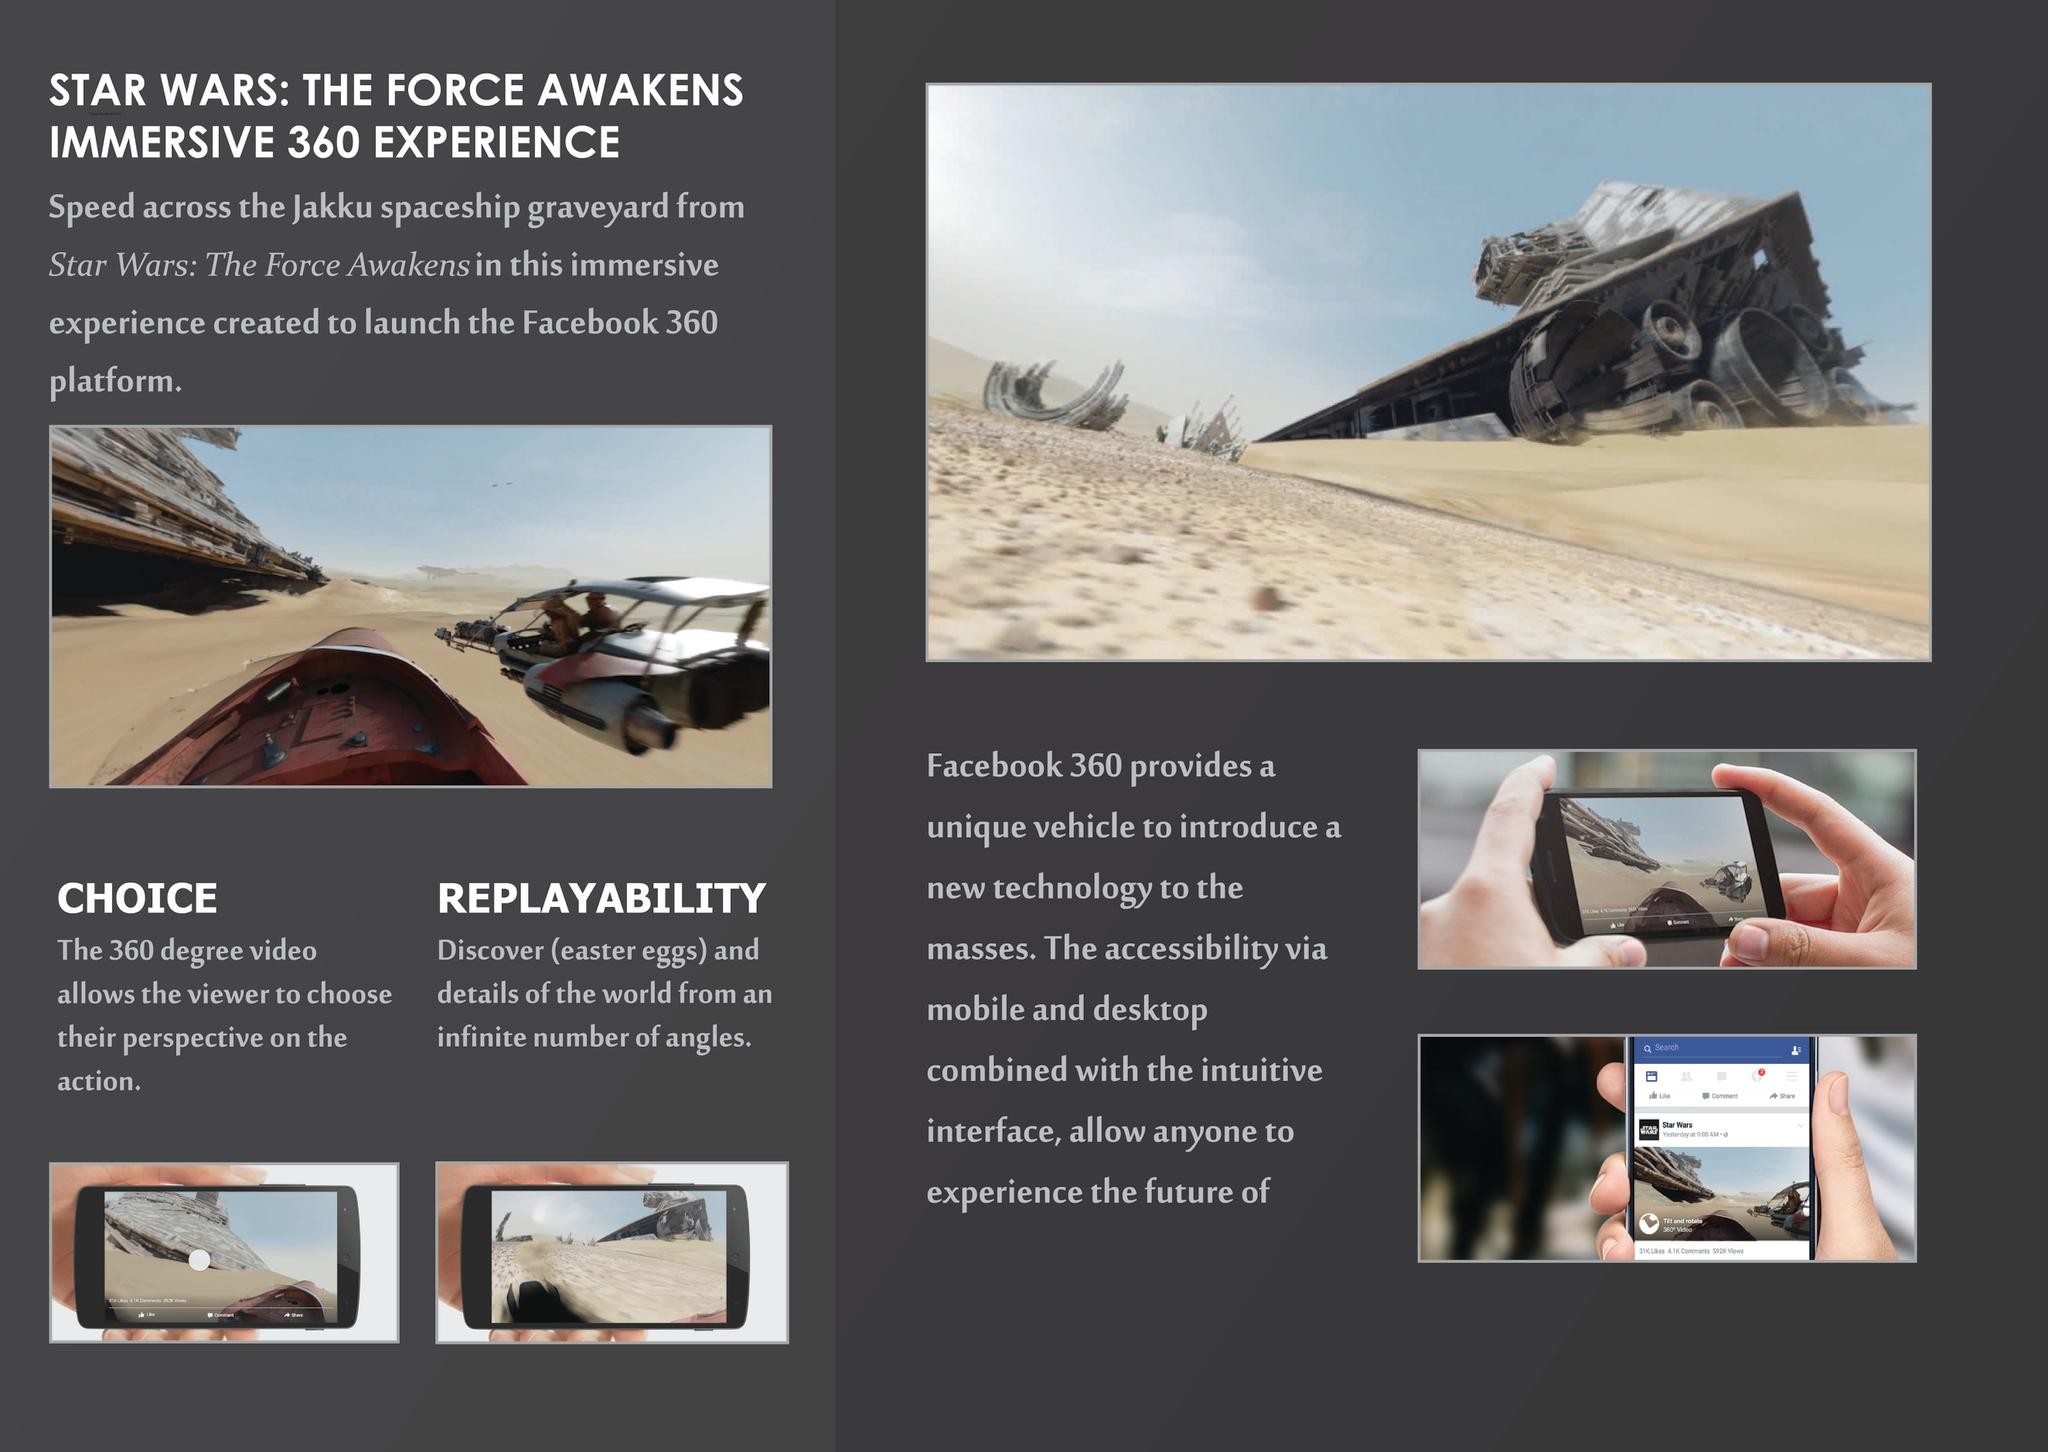 Star Wars: The Force Awakens Immersive 360 Experience